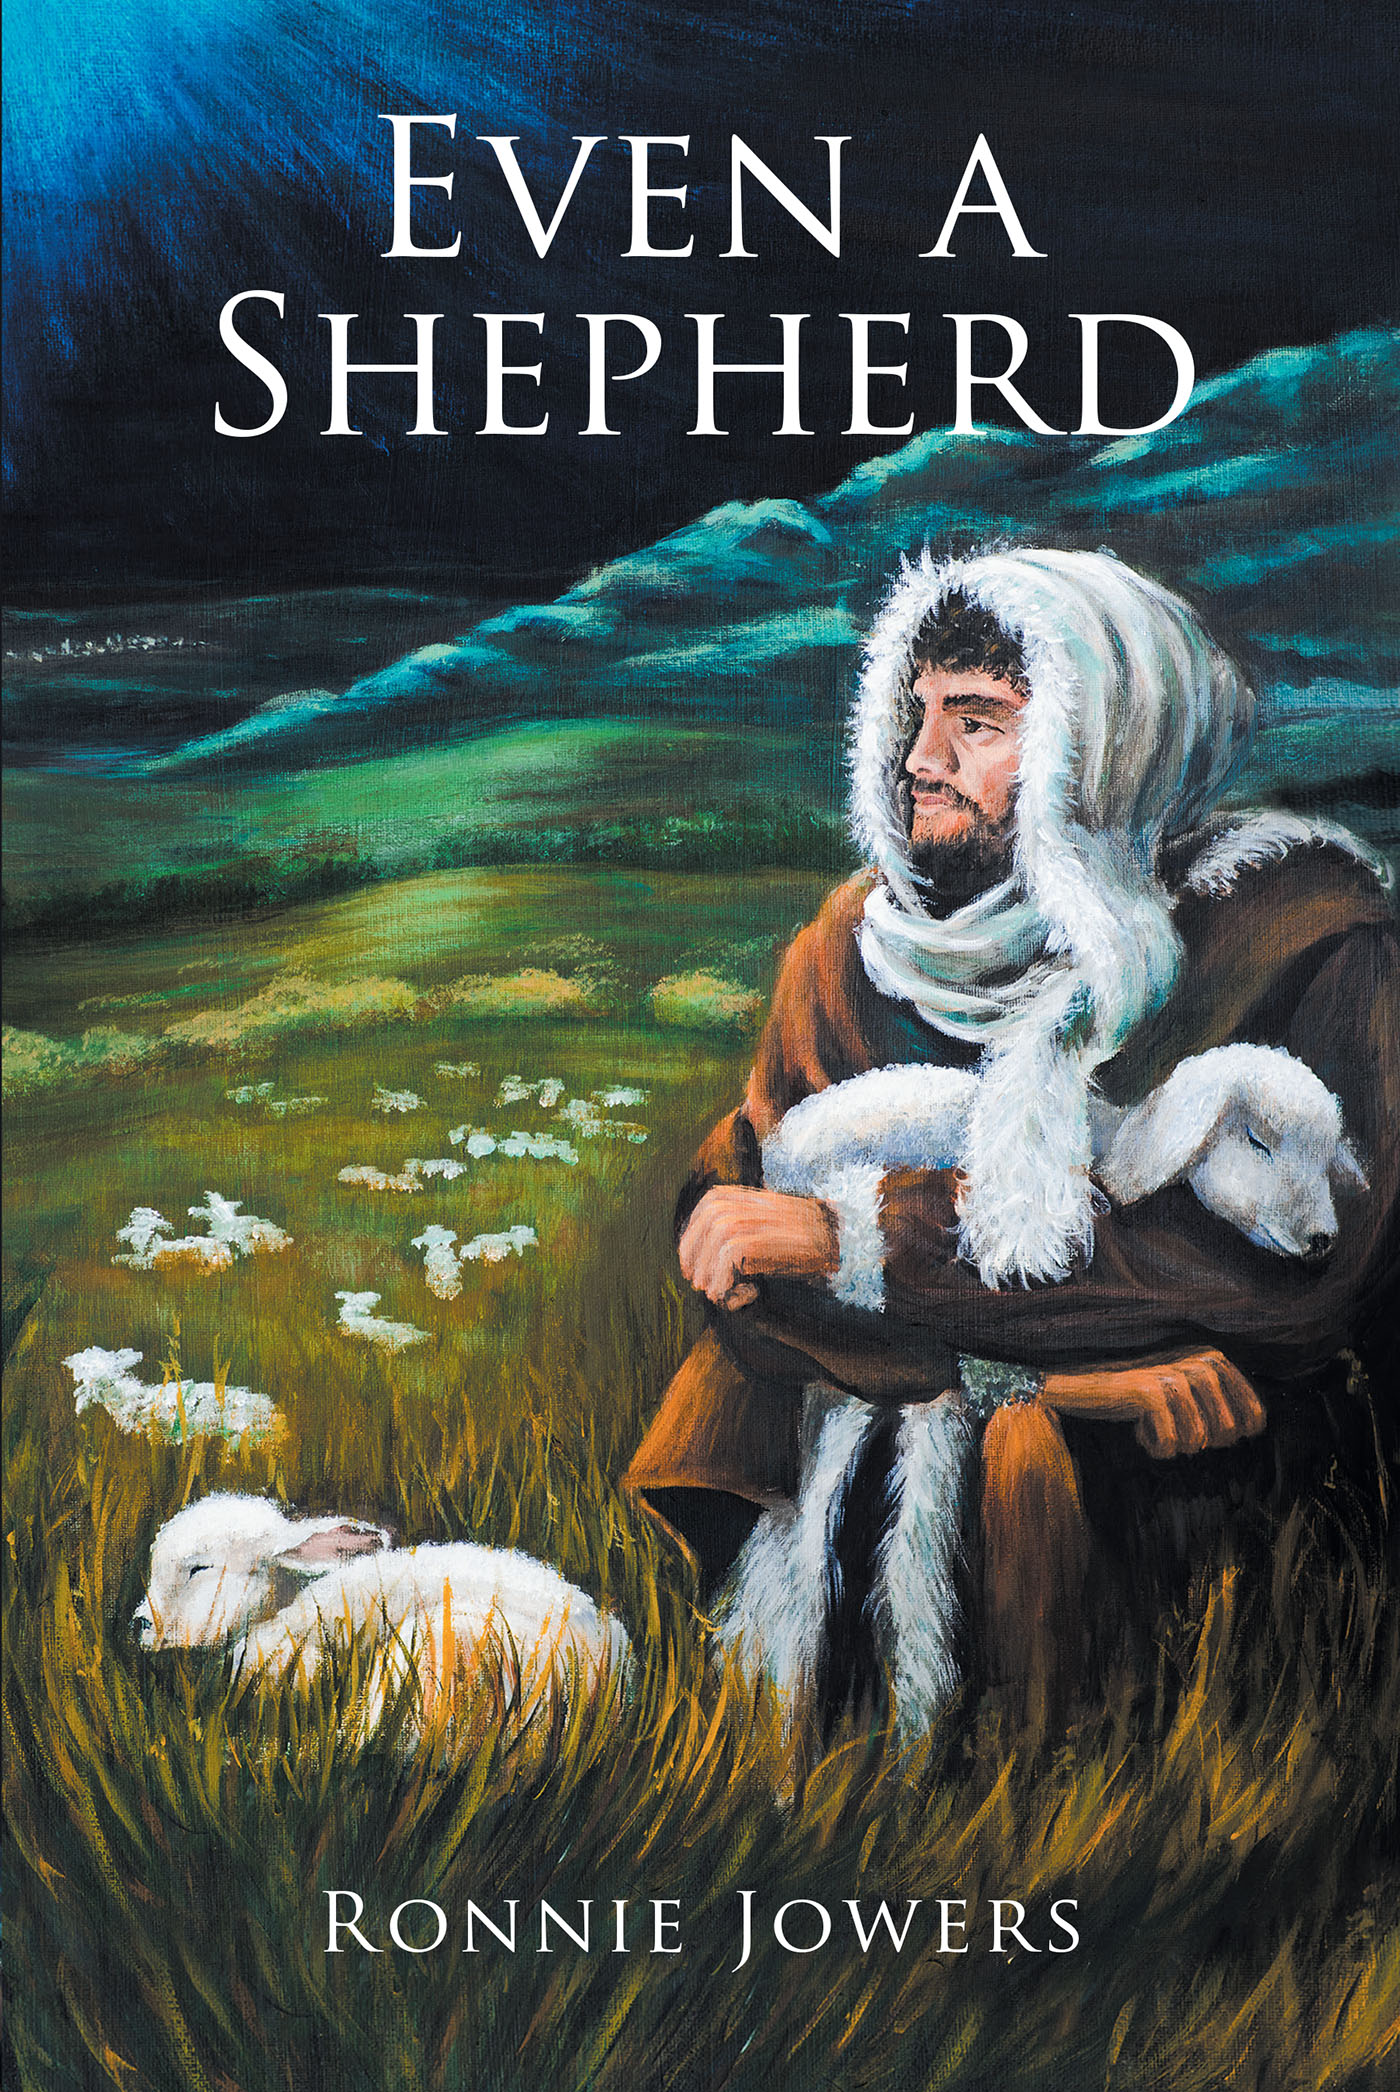 Ronnie Jowers’s Newly Released "Even a Shepherd" is a Creative Perspective of What Life Could Have Been Like for a Young Shepherd Who Witnessed a Miracle